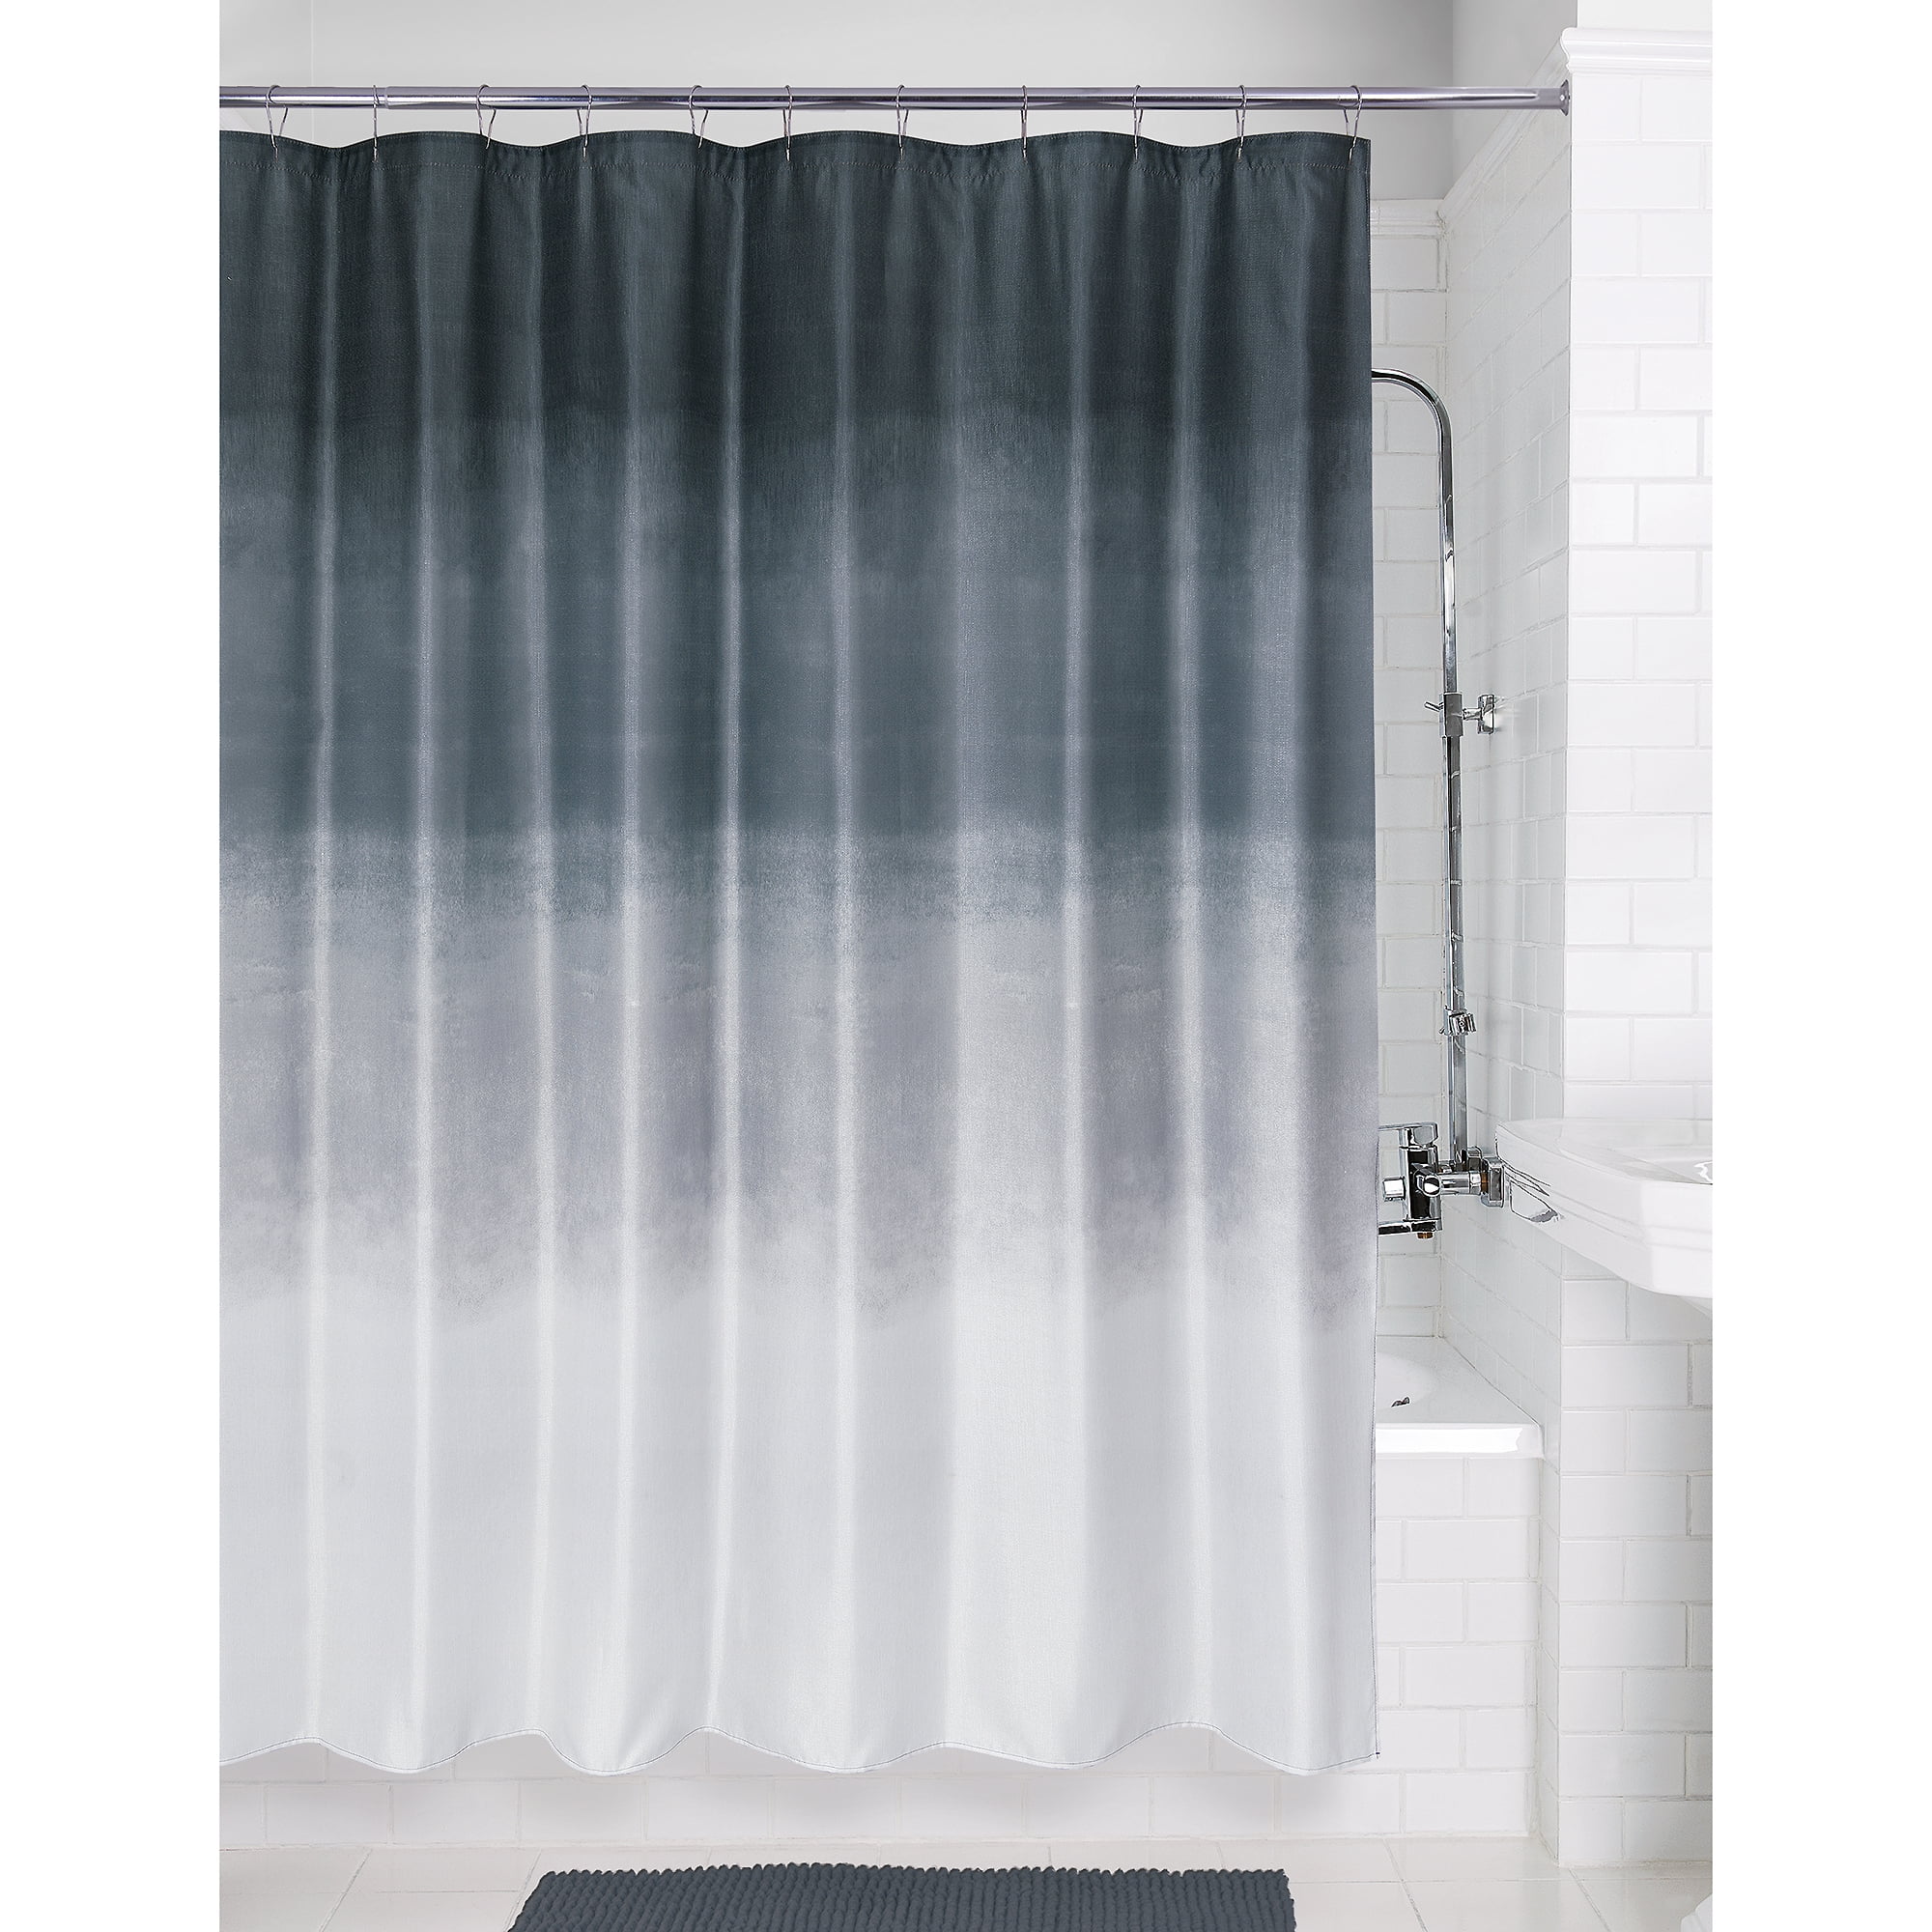 Waterproof Shower Curtain for Bathroom Gradual Color Ombre Textured 70"W x 72"L 